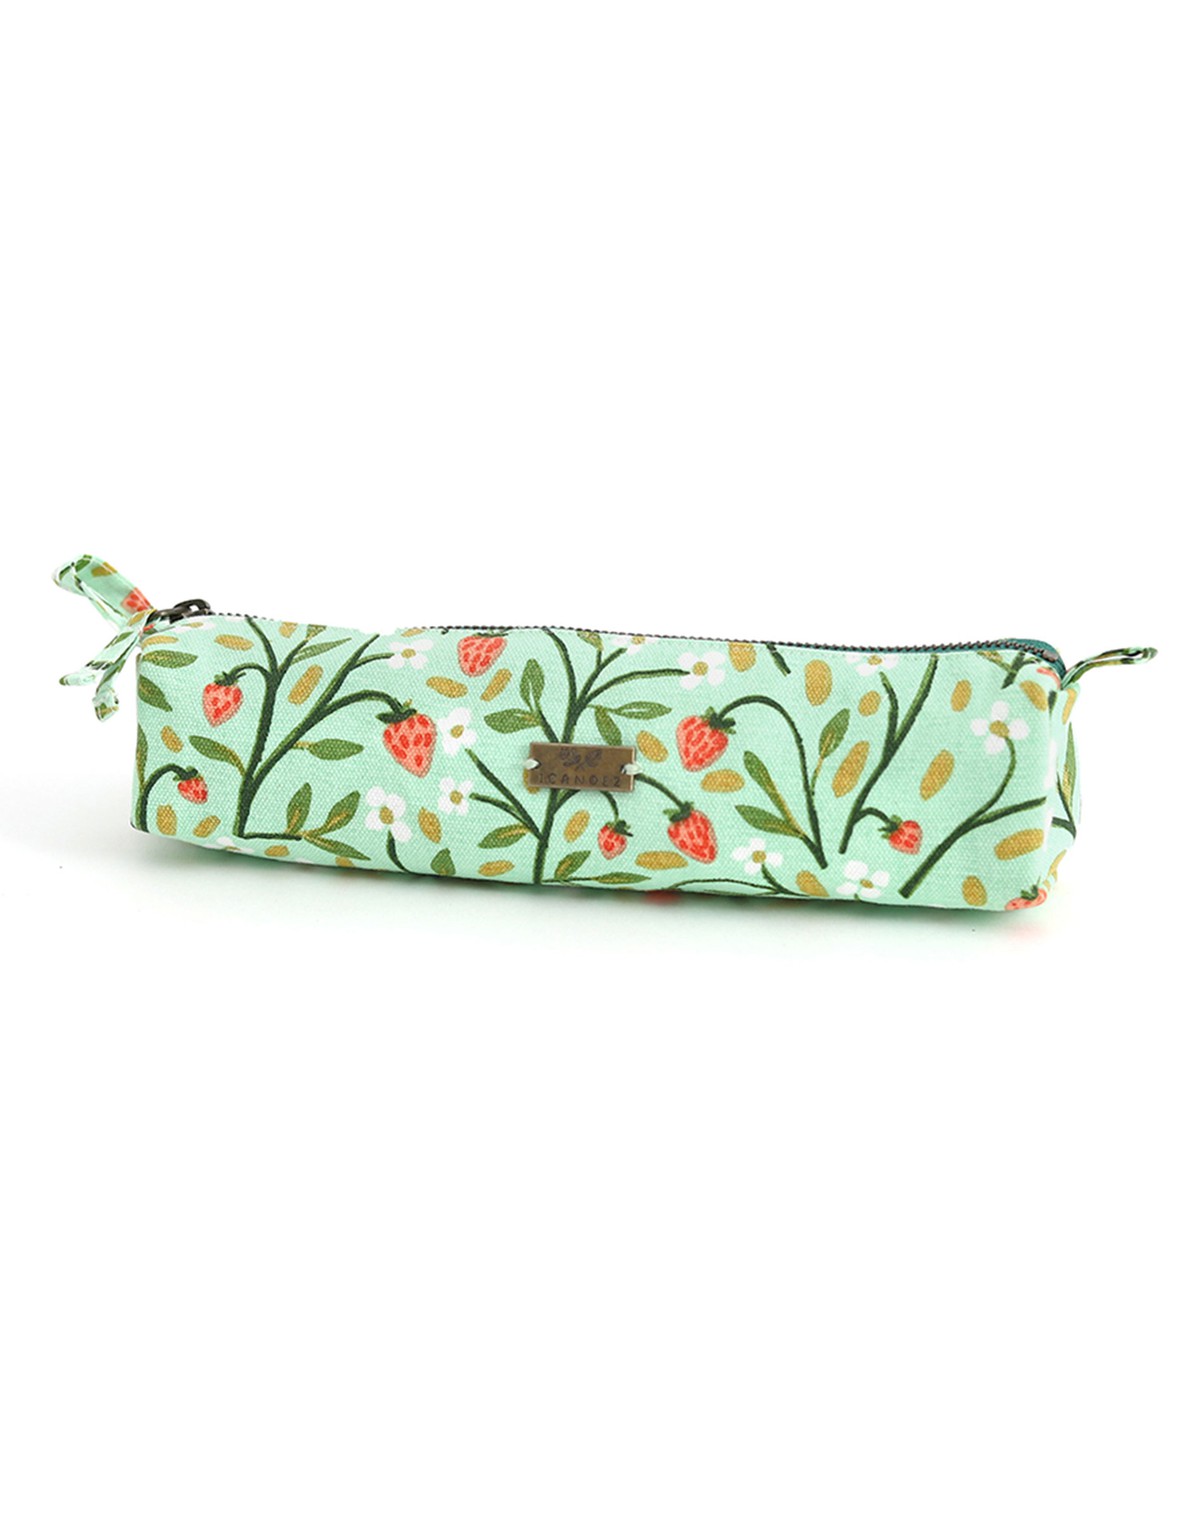 Strawberry Meadow Pencil Pouch item